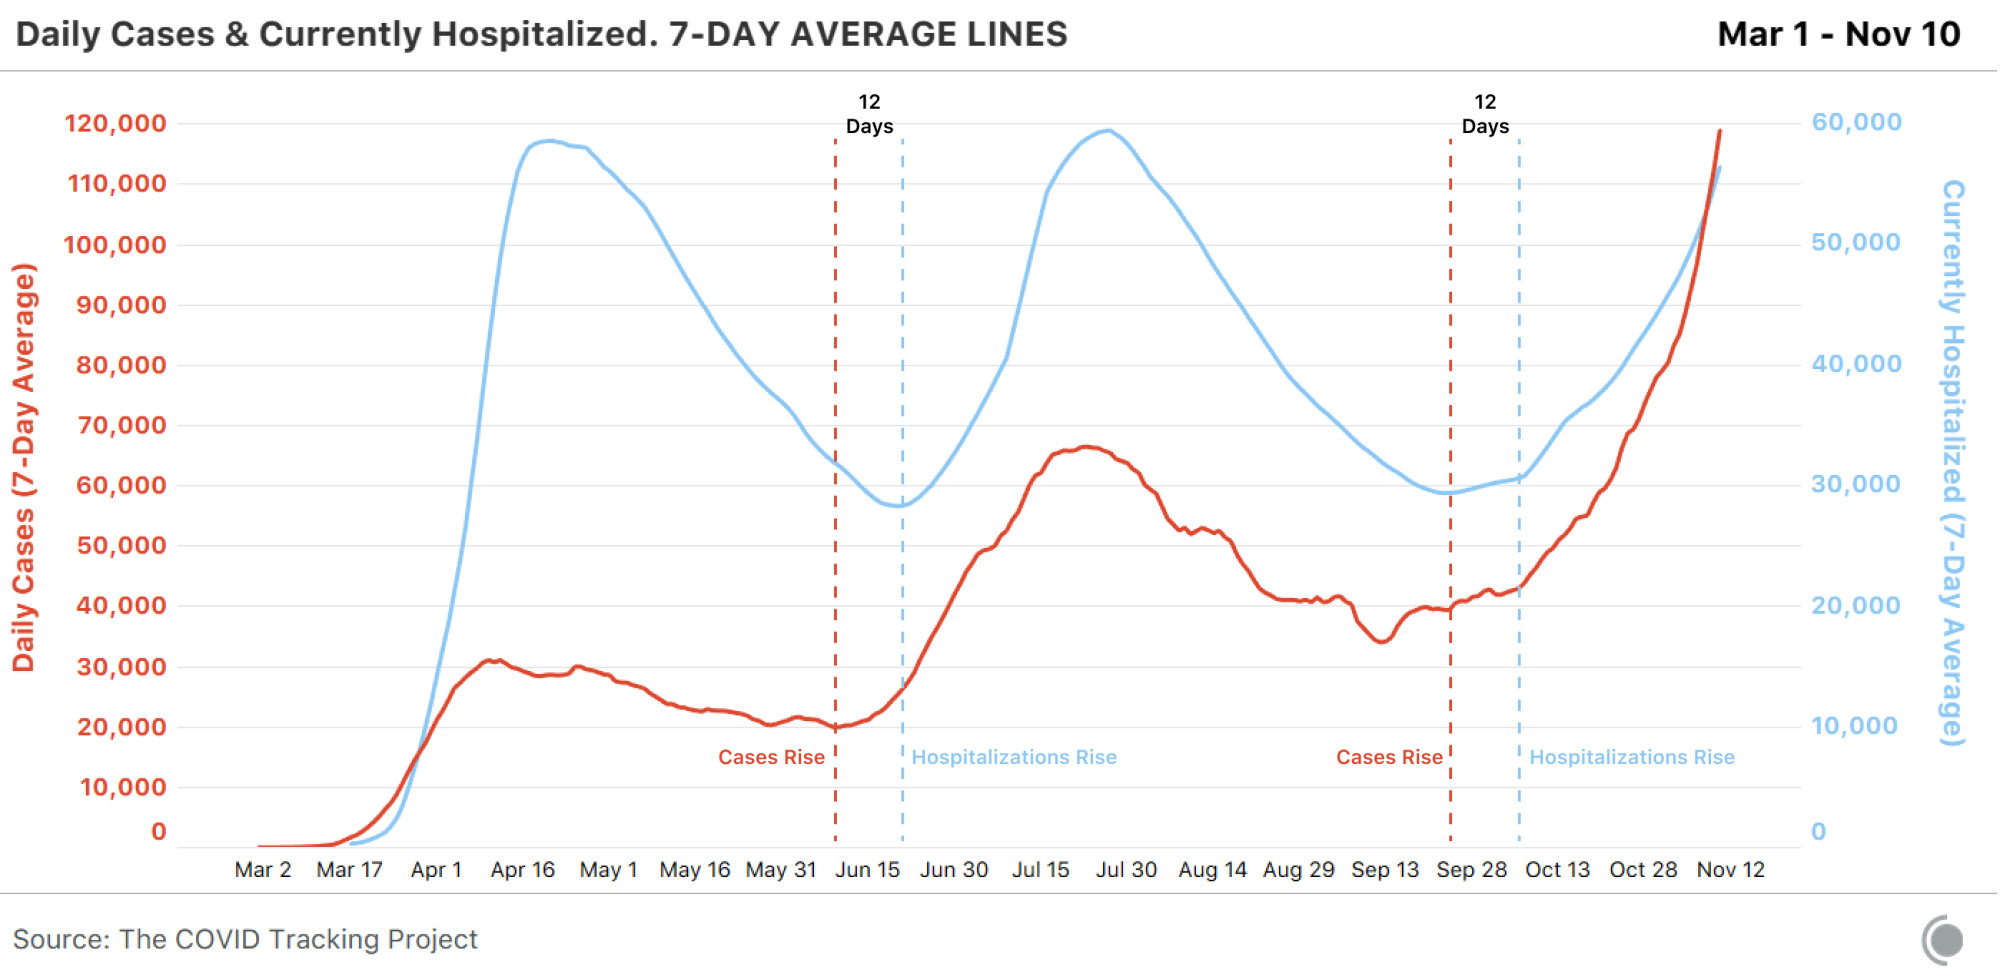 The graph compares the 7-day average lines of daily new cases and current hospitalizations from March 1 through November 10. The comparison demonstrates that there is a correlation between cases and hospitalizations, where hospitalizations begin to rise approximately 12 days after cases start trending upwards.